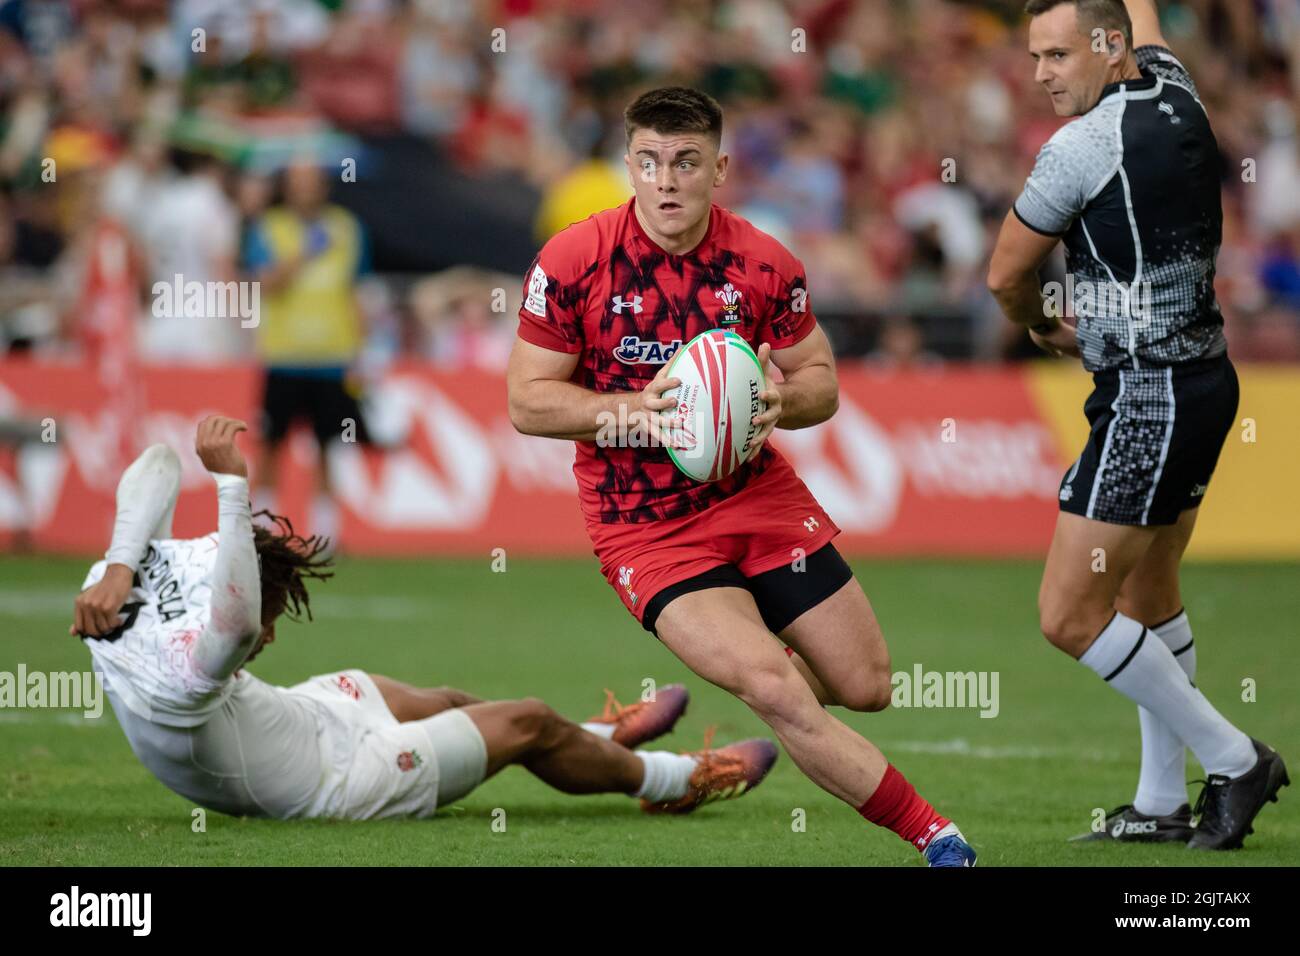 SINGAPORE-APRIL 13:Wales 7s Team (red) plays against England 7s team (white) during Day 1 of HSBC World Rugby Singapore Sevens on April 13, 2019 at National Stadium in Singapore Stock Photo